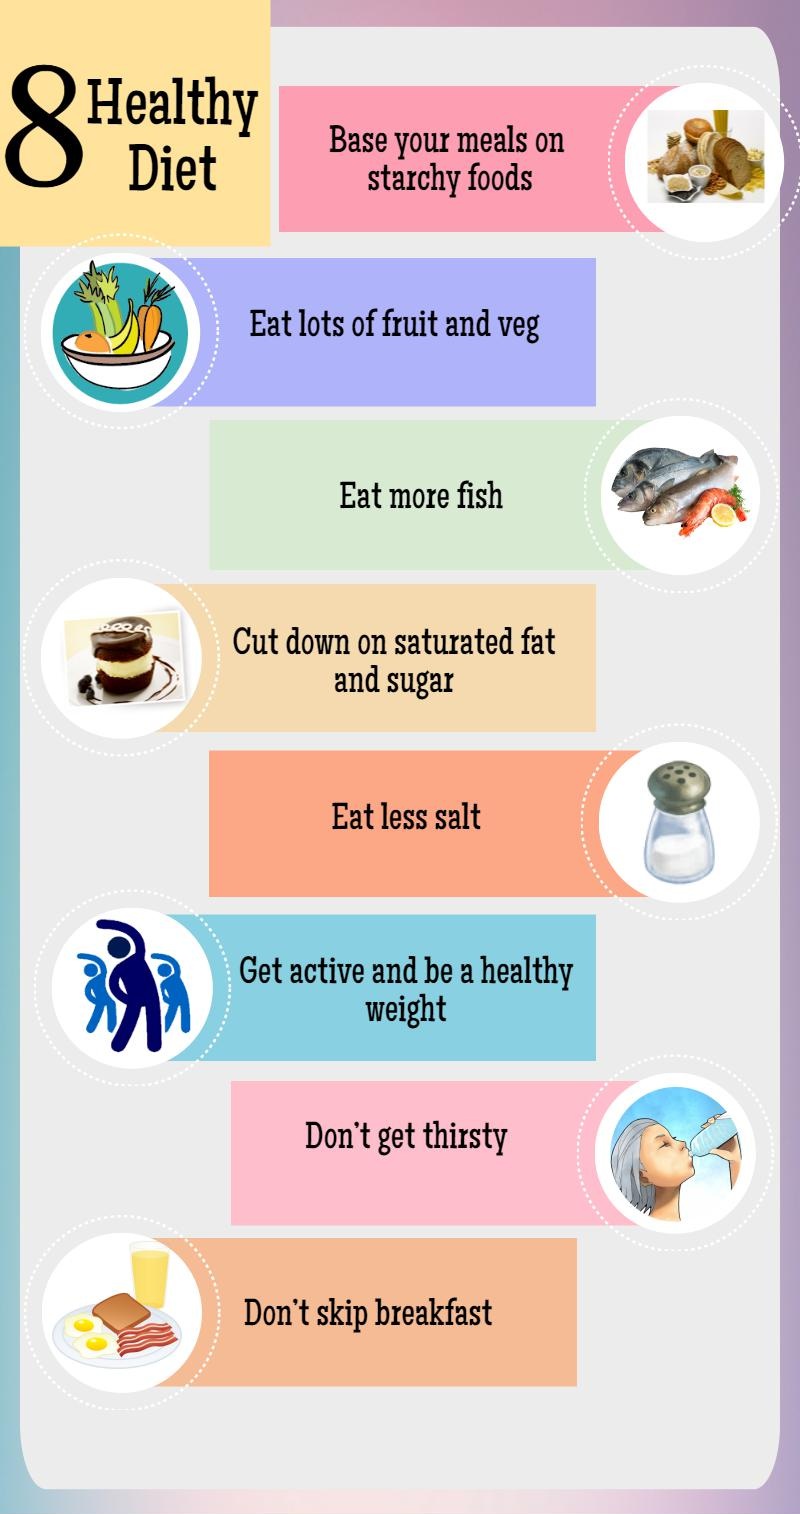 what are the 10 healthy tips?